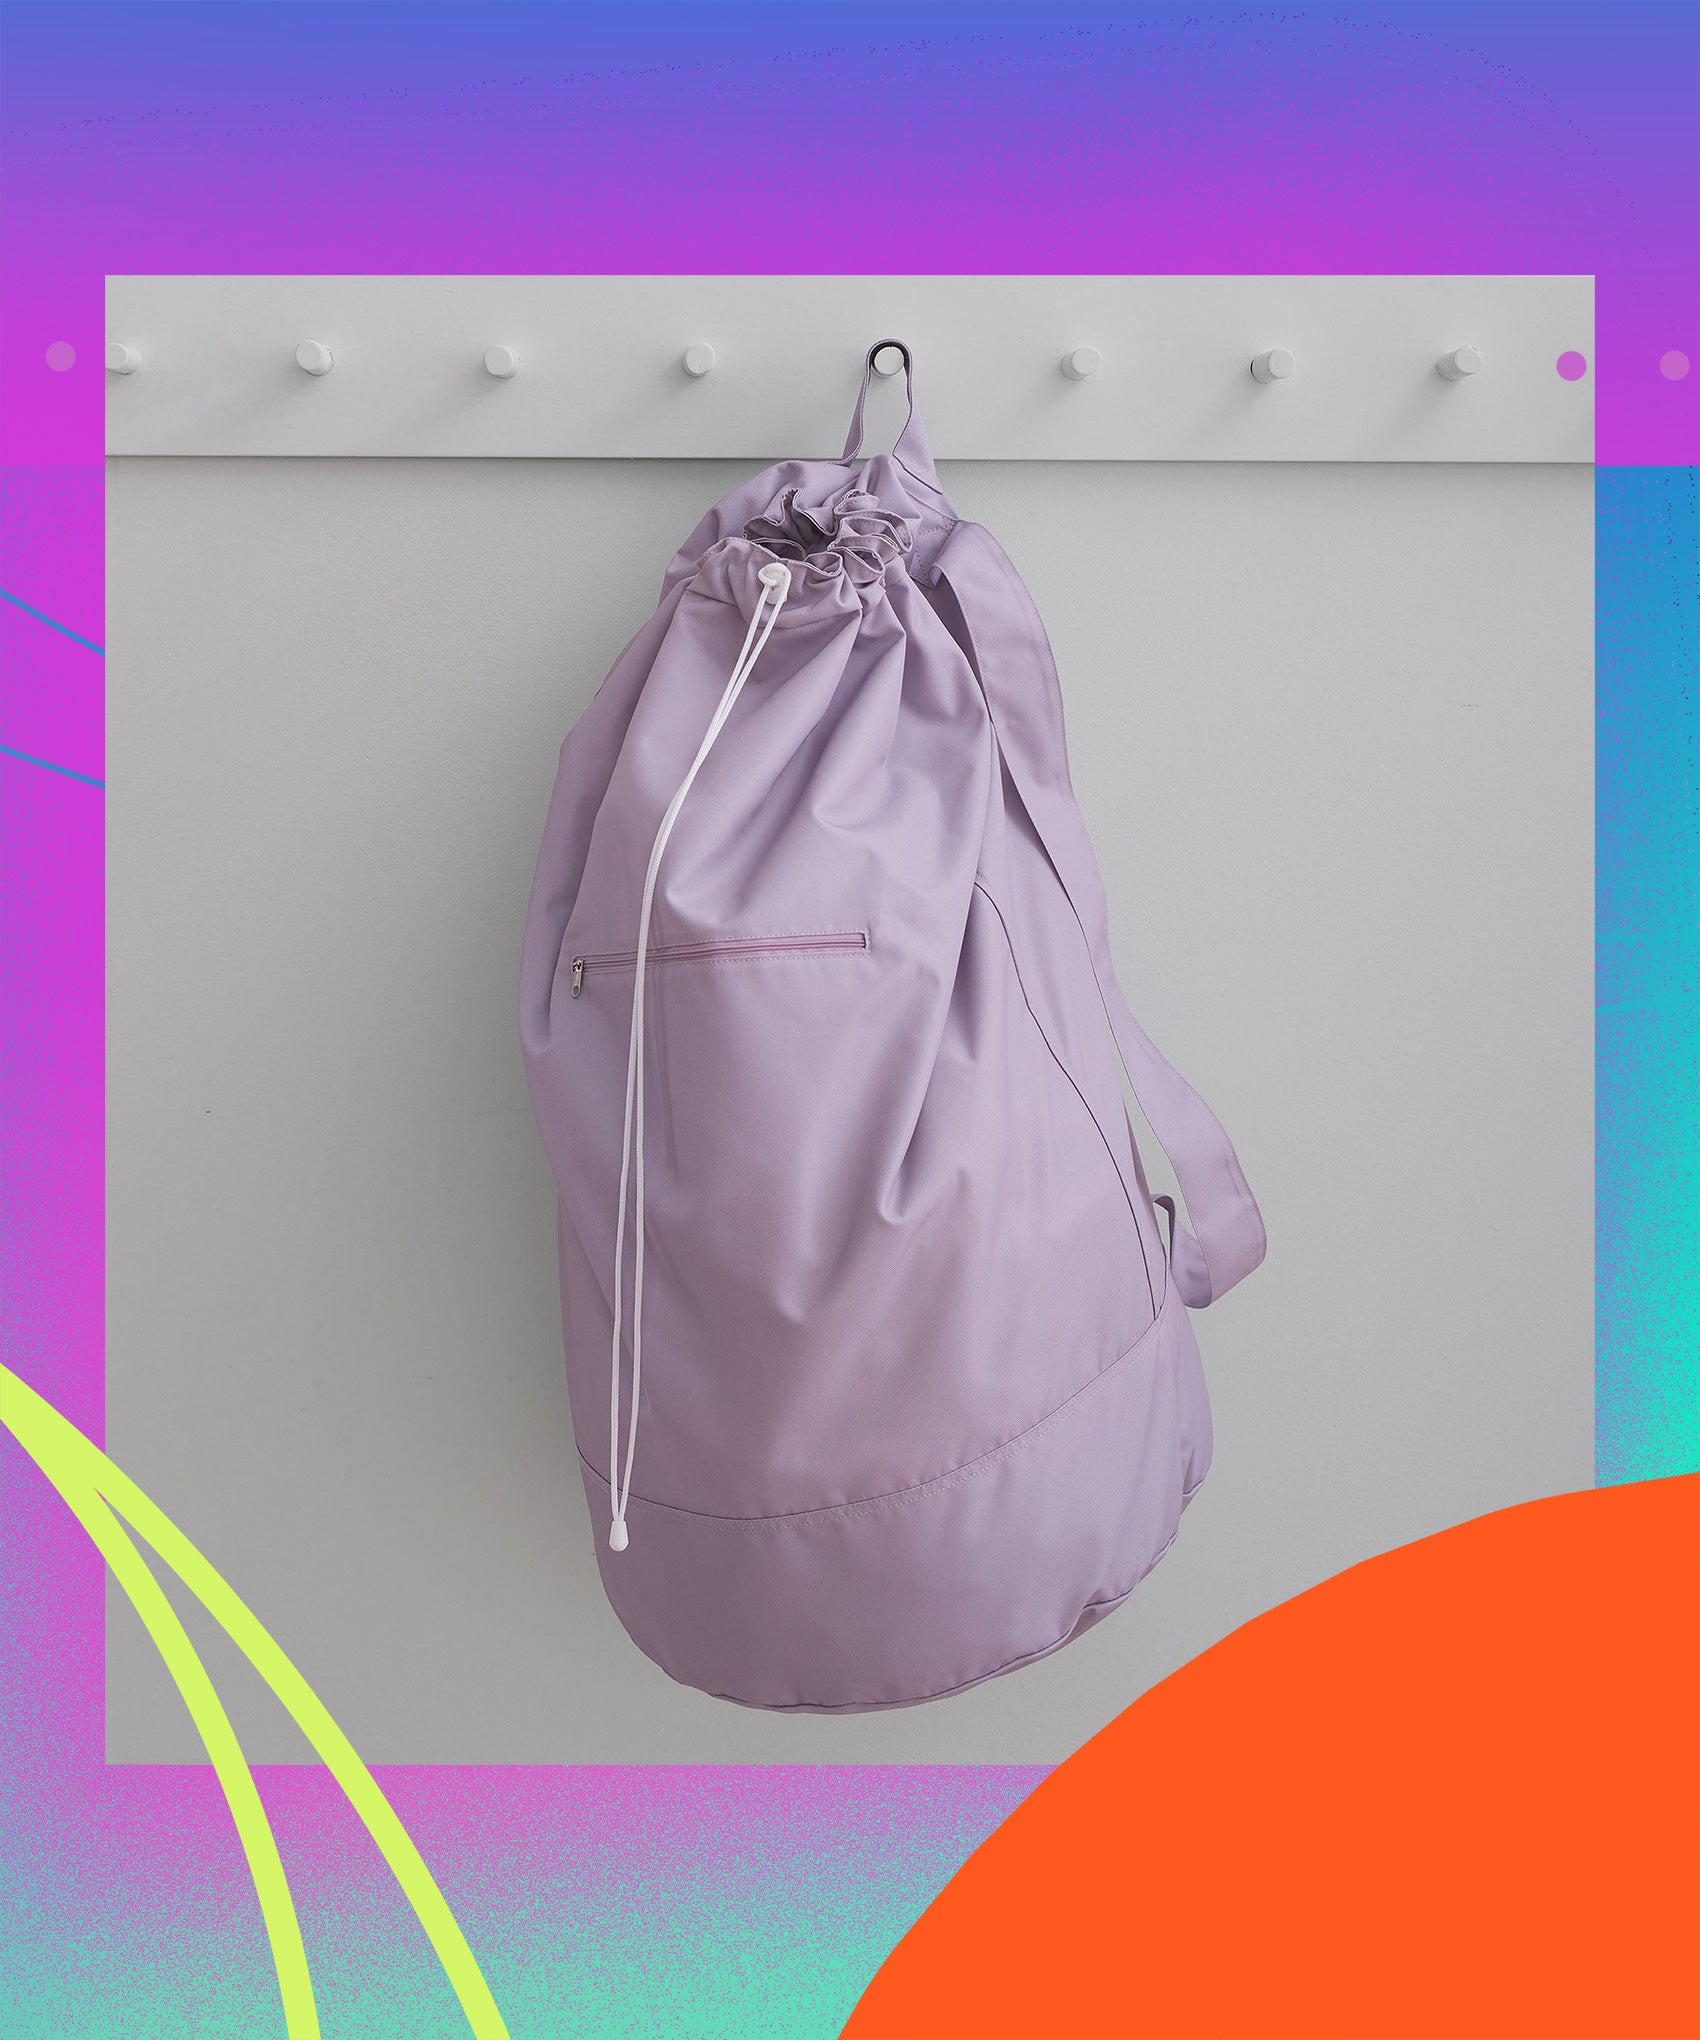 Portable Laundry Bag for Room Students Suitable for Travel Dirty Clothes  Bag Organizer